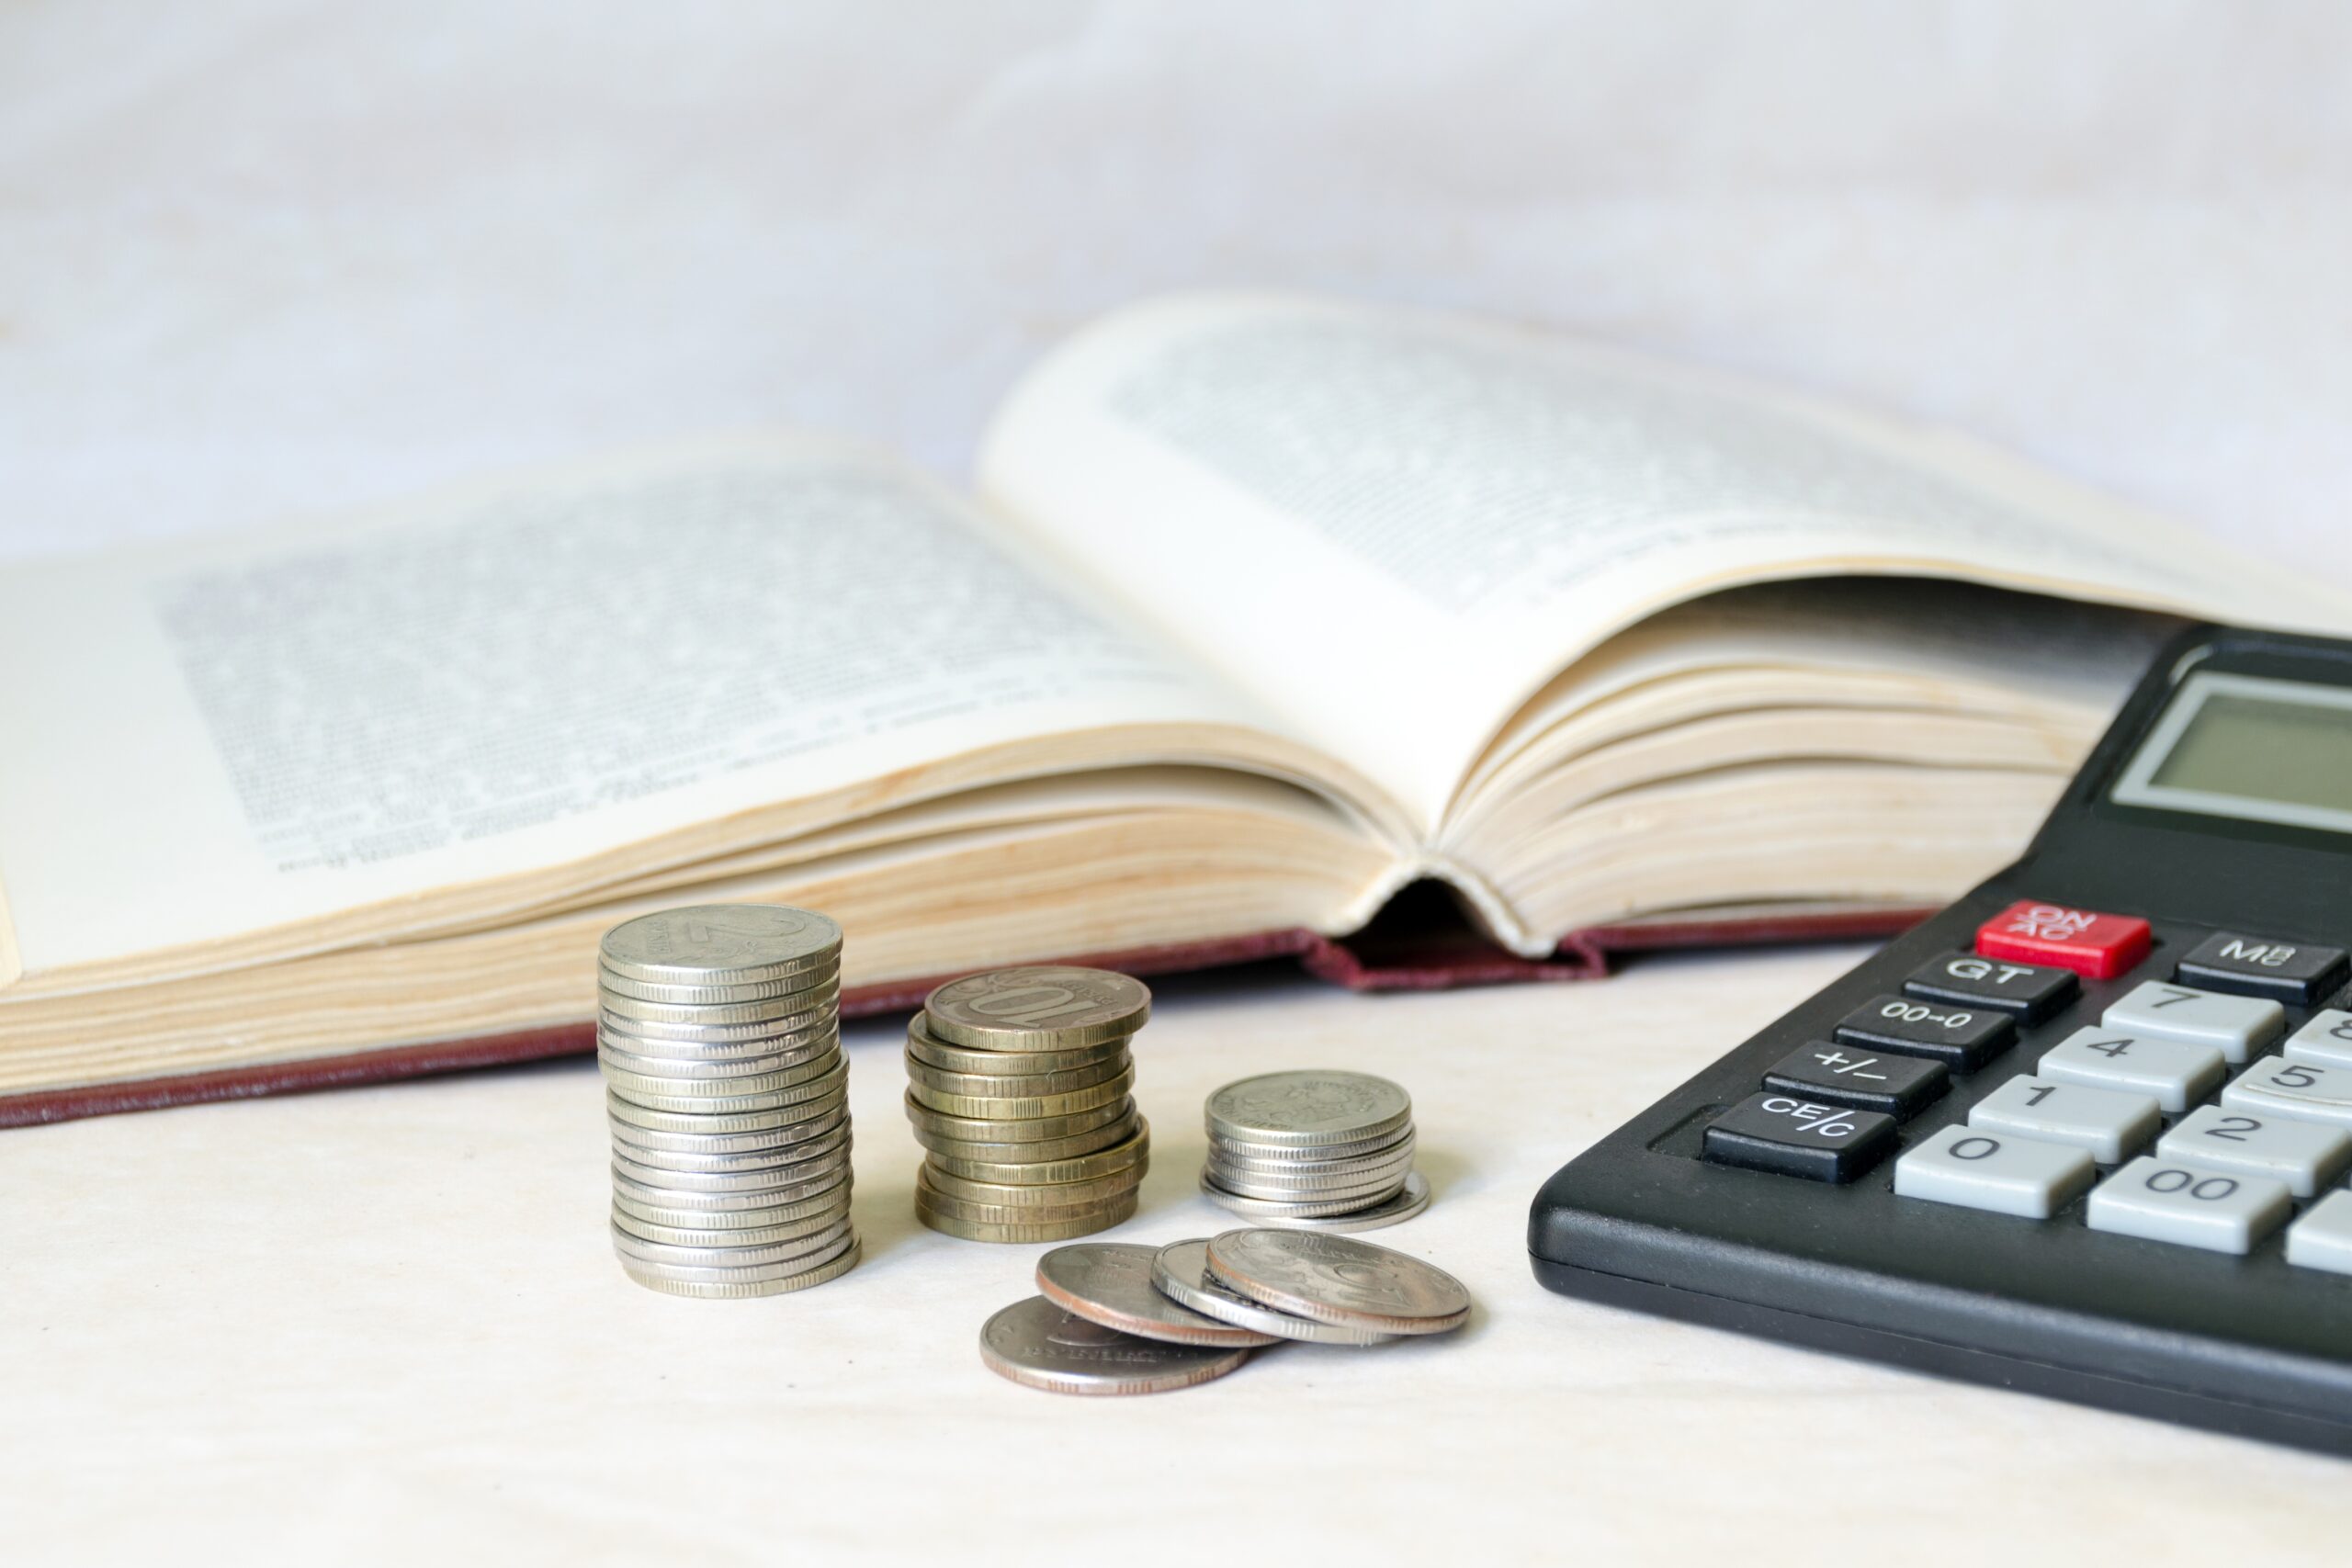 A stack of coins and a calculator in front of an open book. The